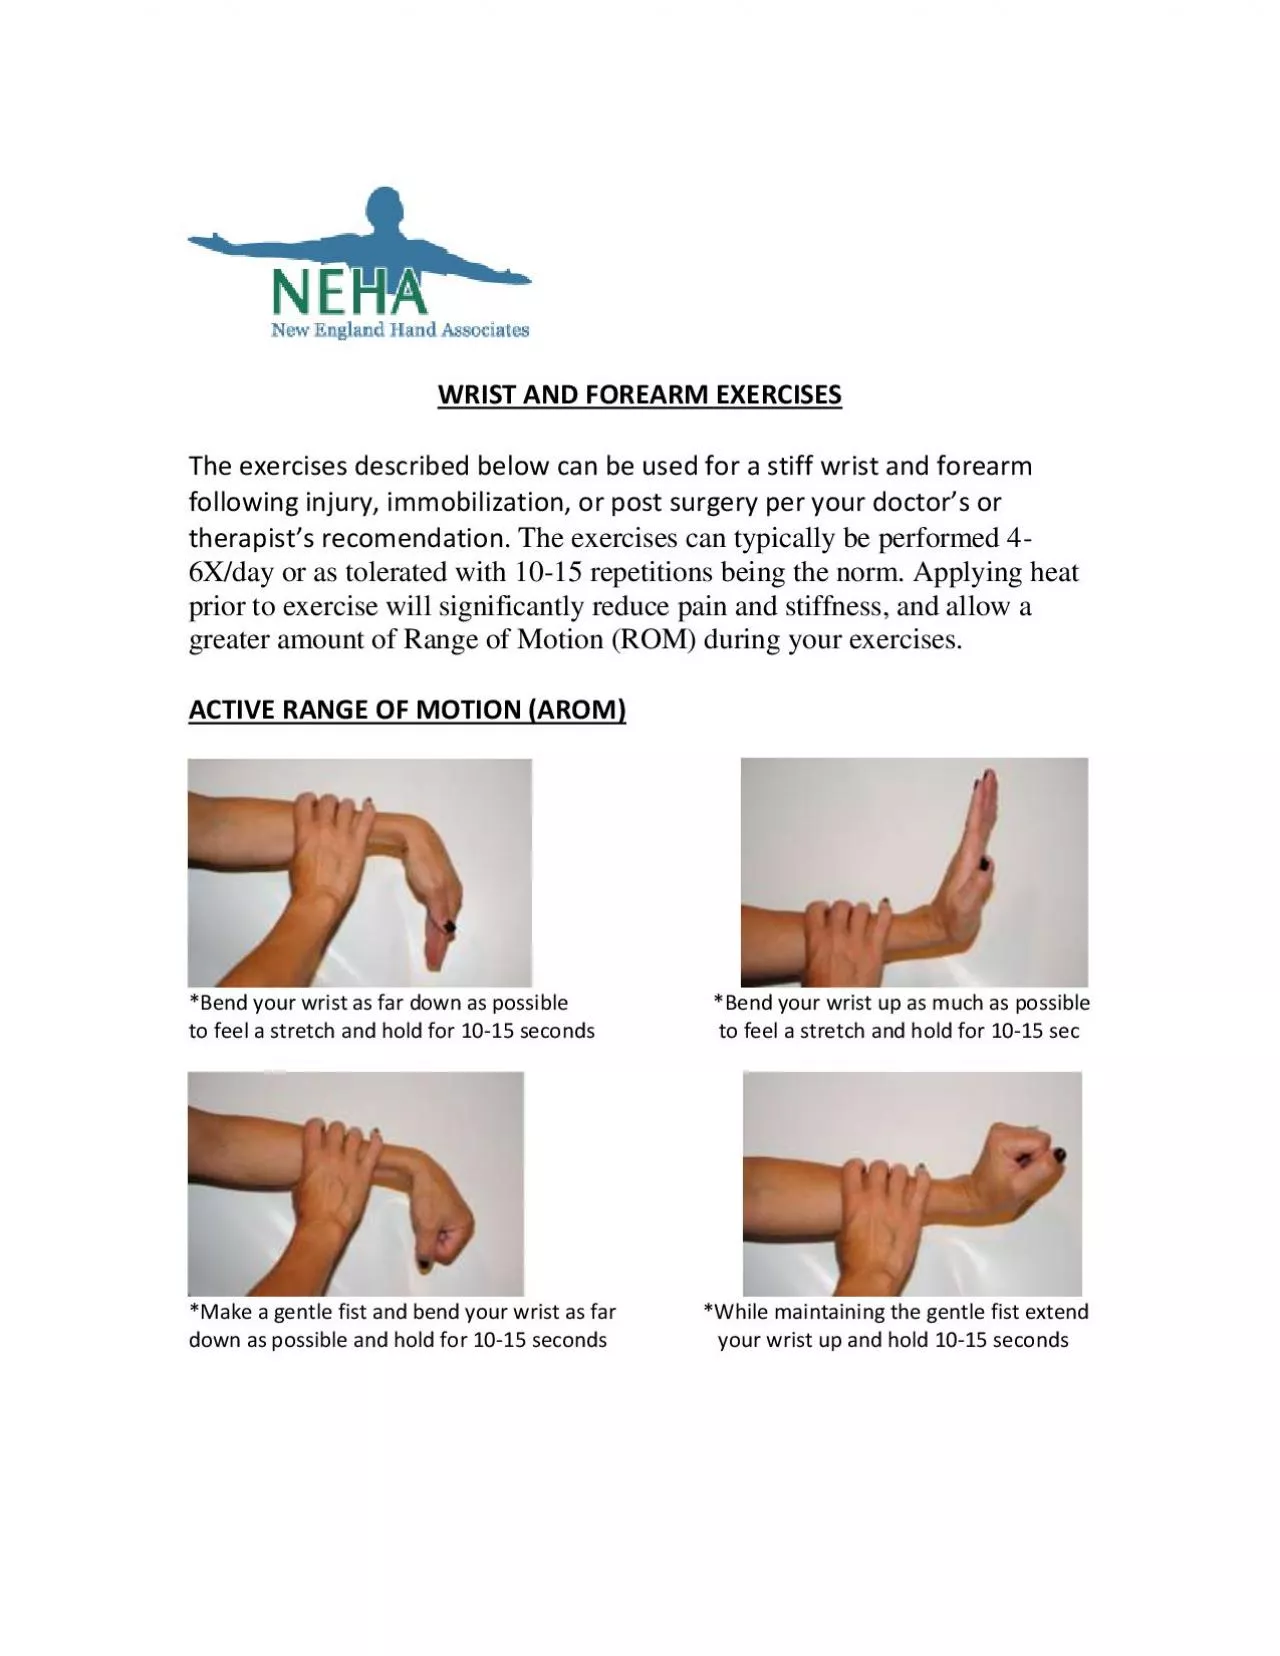 WRIST AND FOREARM EXERCISES